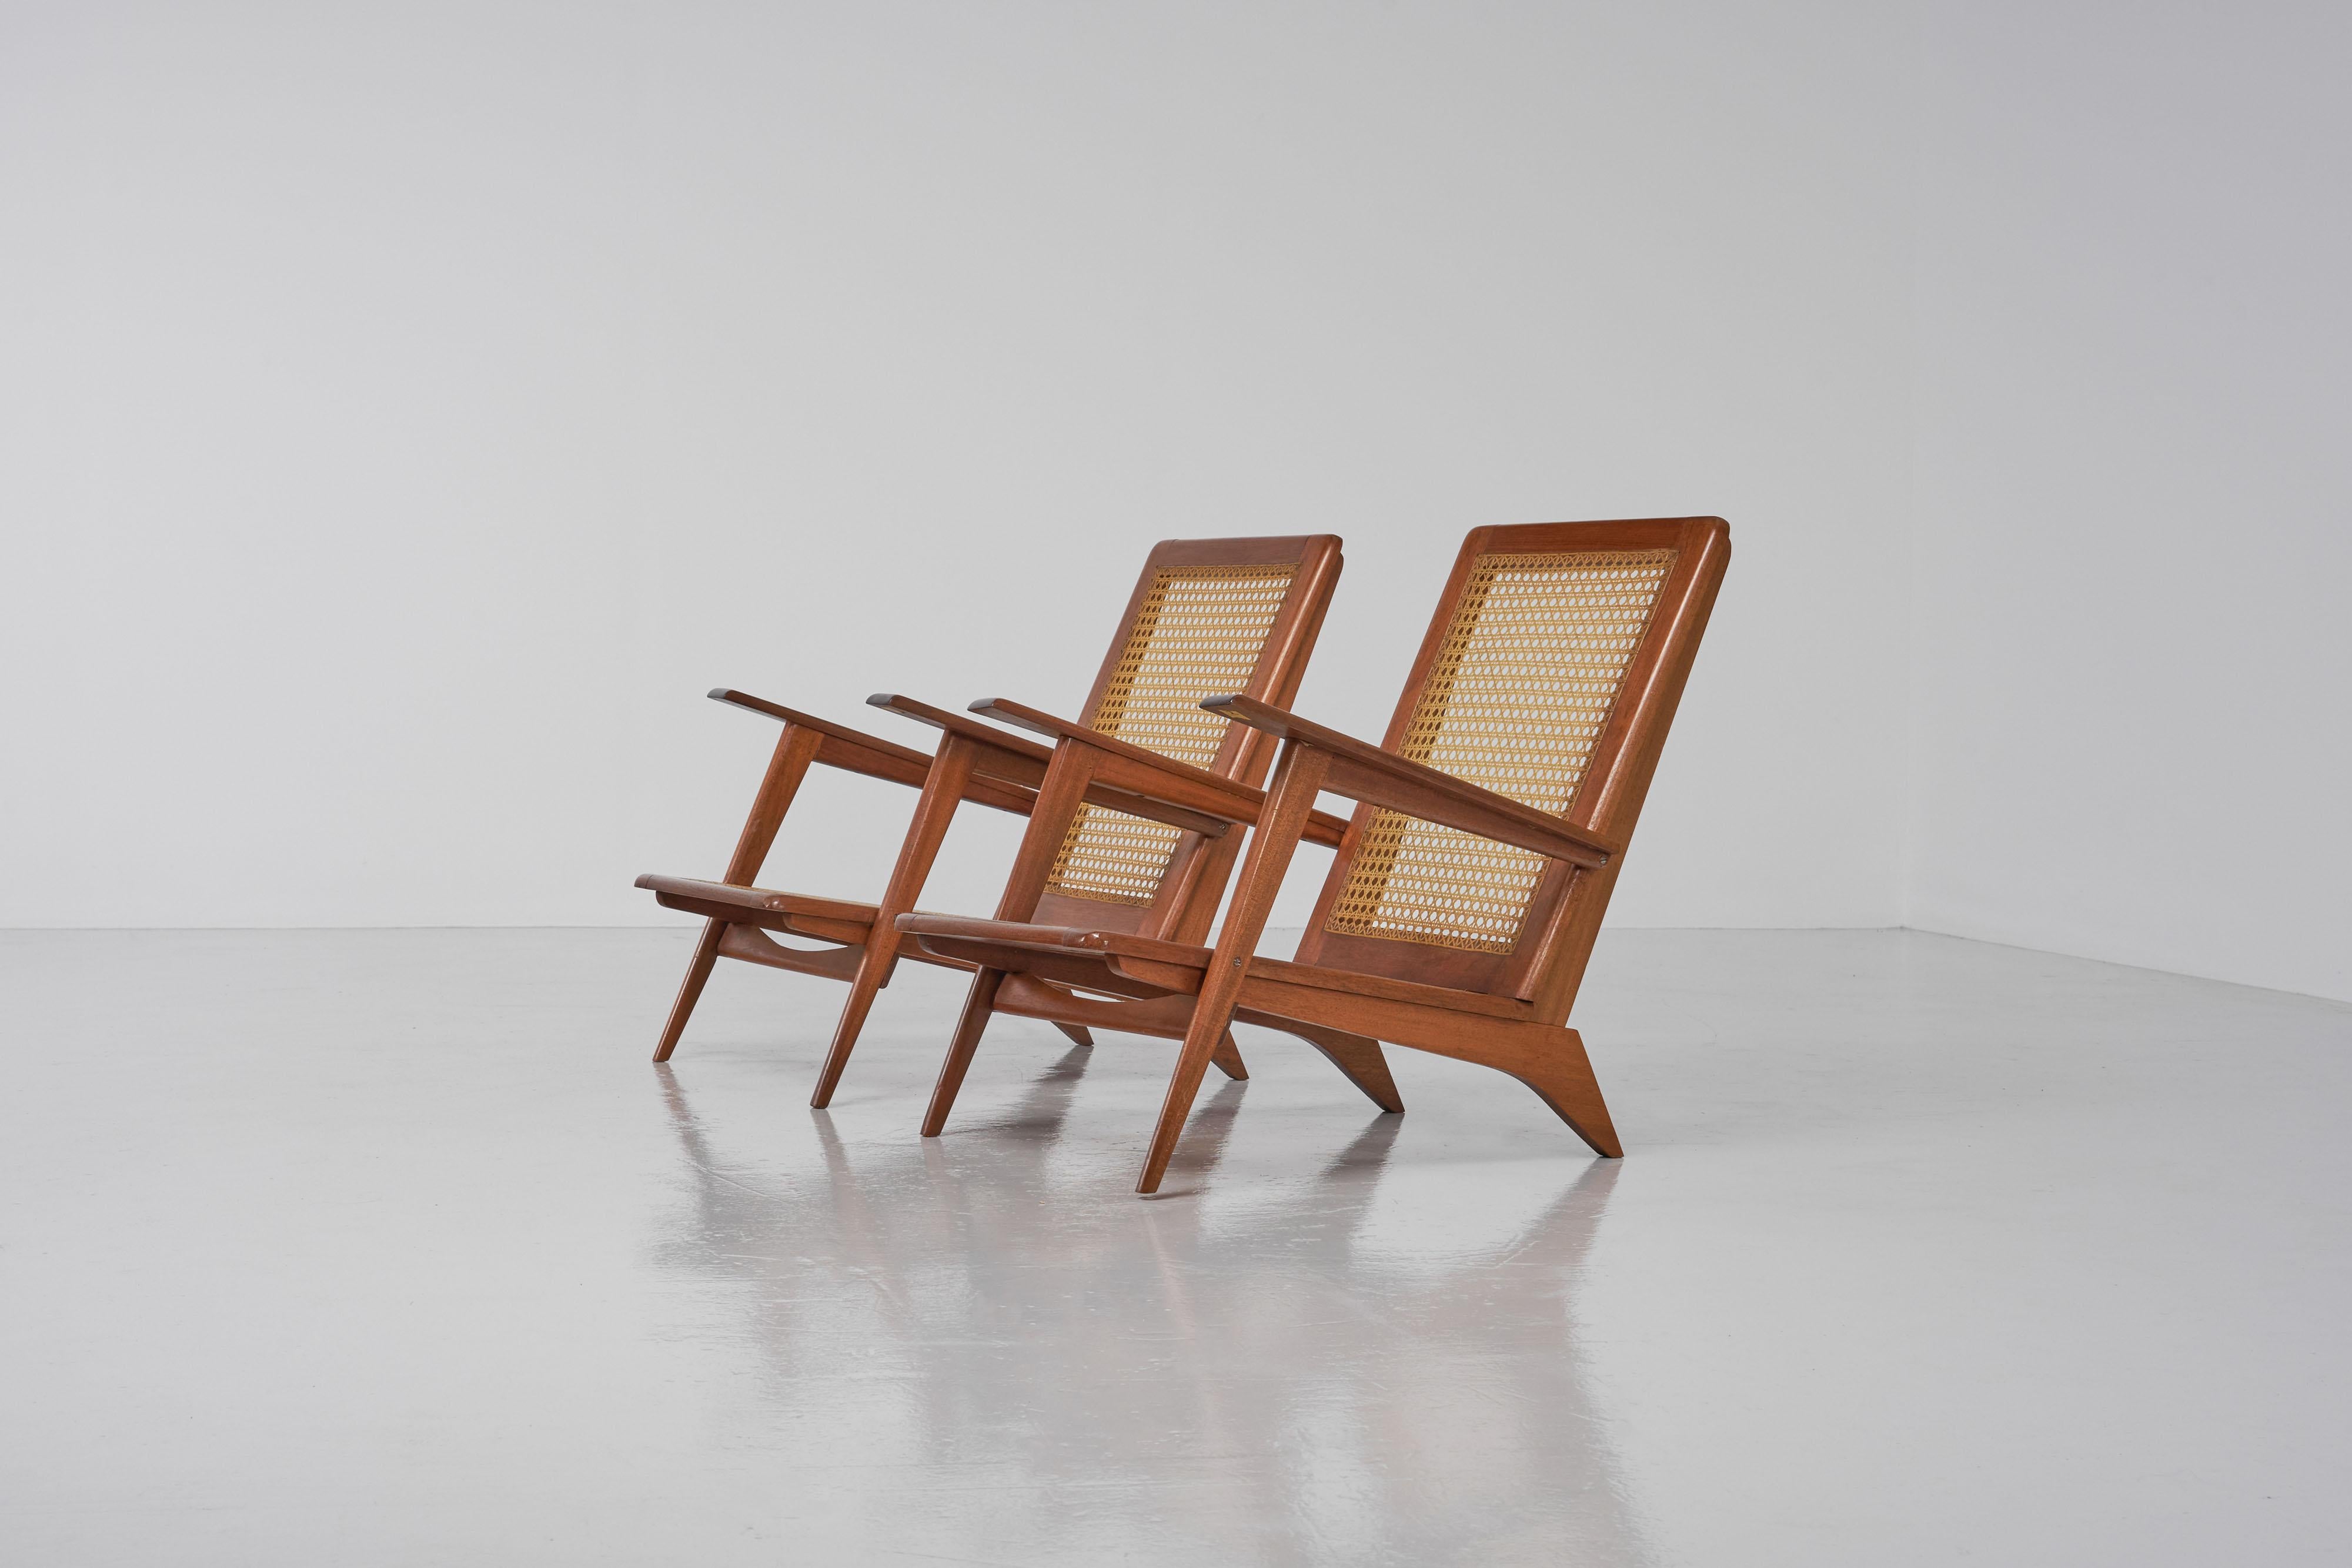 Excellent shaped large lounge chairs designed by Michel Ducaroy and manufactured by SNA Roset, France 1950s. Michel Ducaroy, of course enormously famous by his Togo sofa designed for his own company Ligne Roset, was the director of SNA Roset before